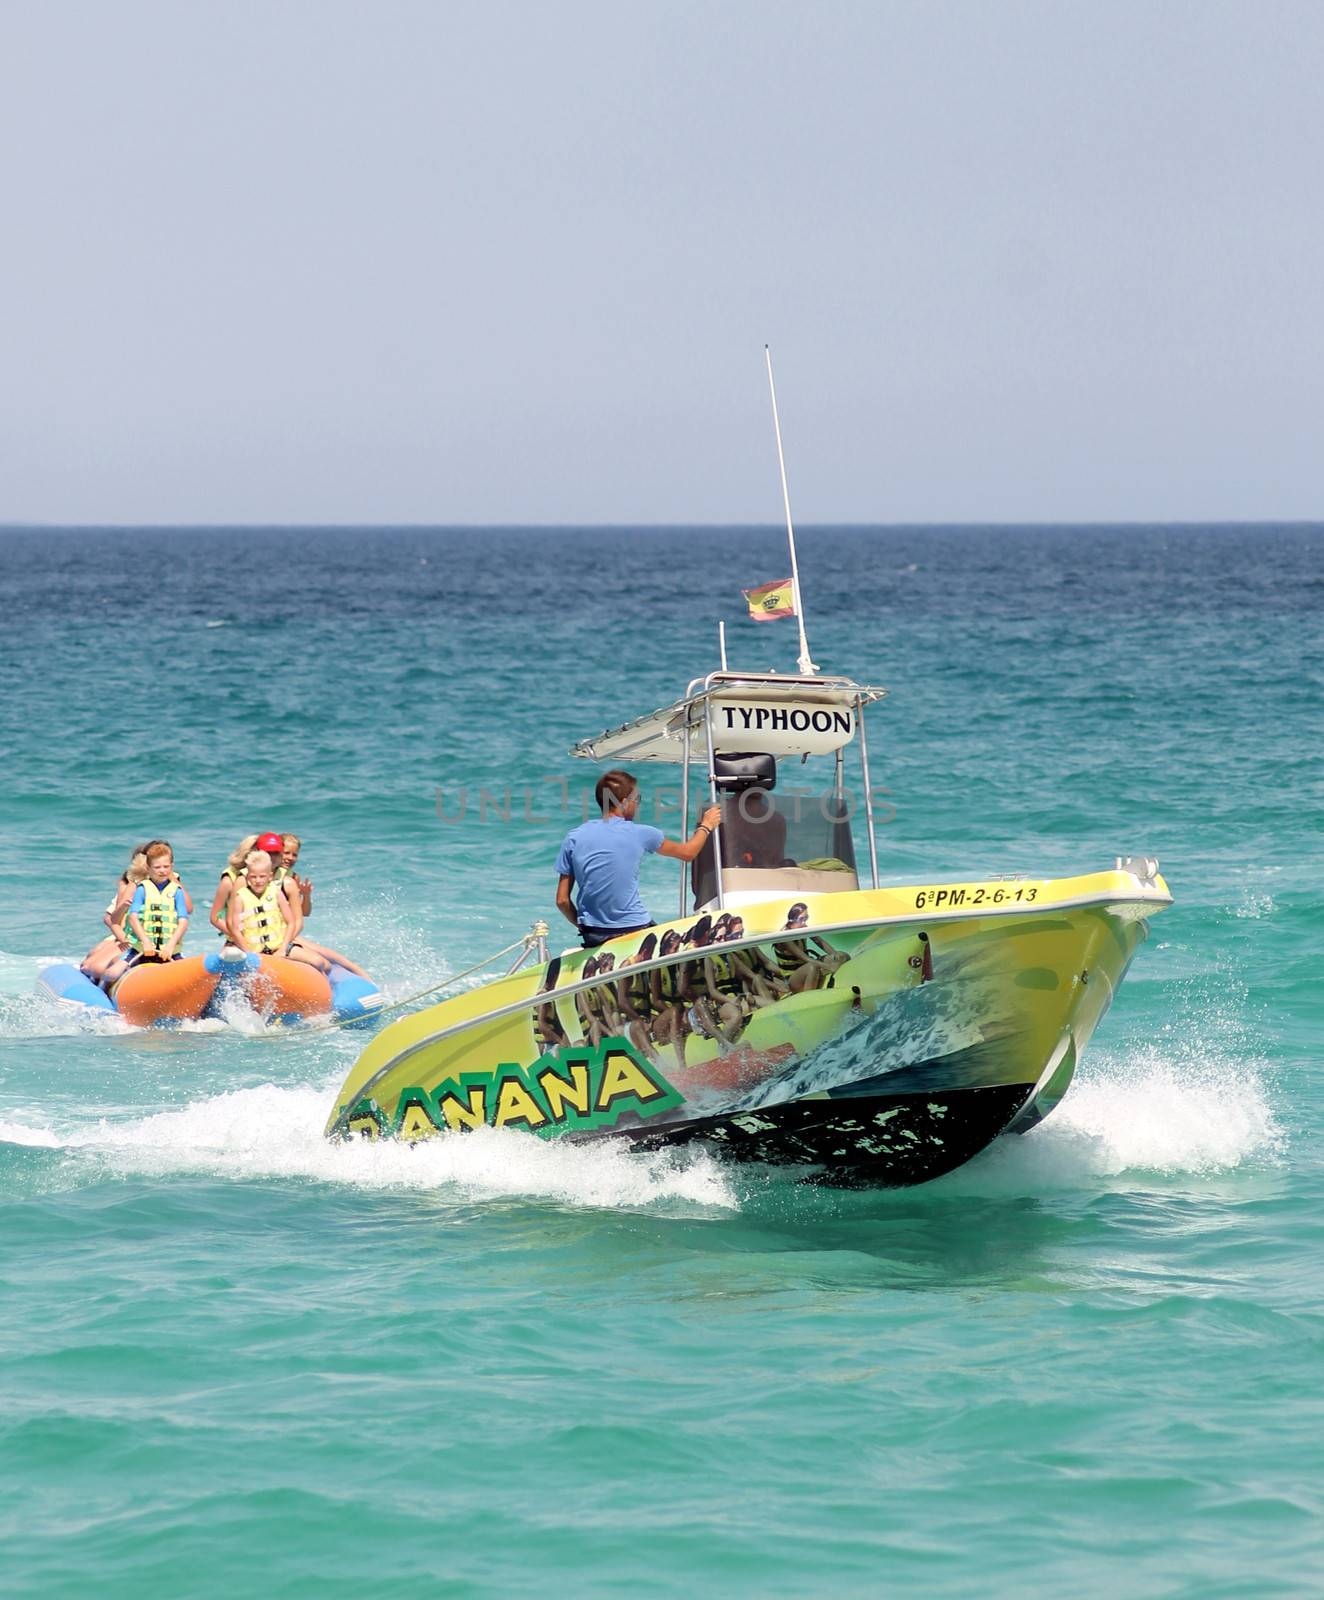 ALCUDIA , MAJORCA, SPAIN - 8th August 2013: Children enjoying a banana boat ride in Alcudia on the 8th August 2013. 